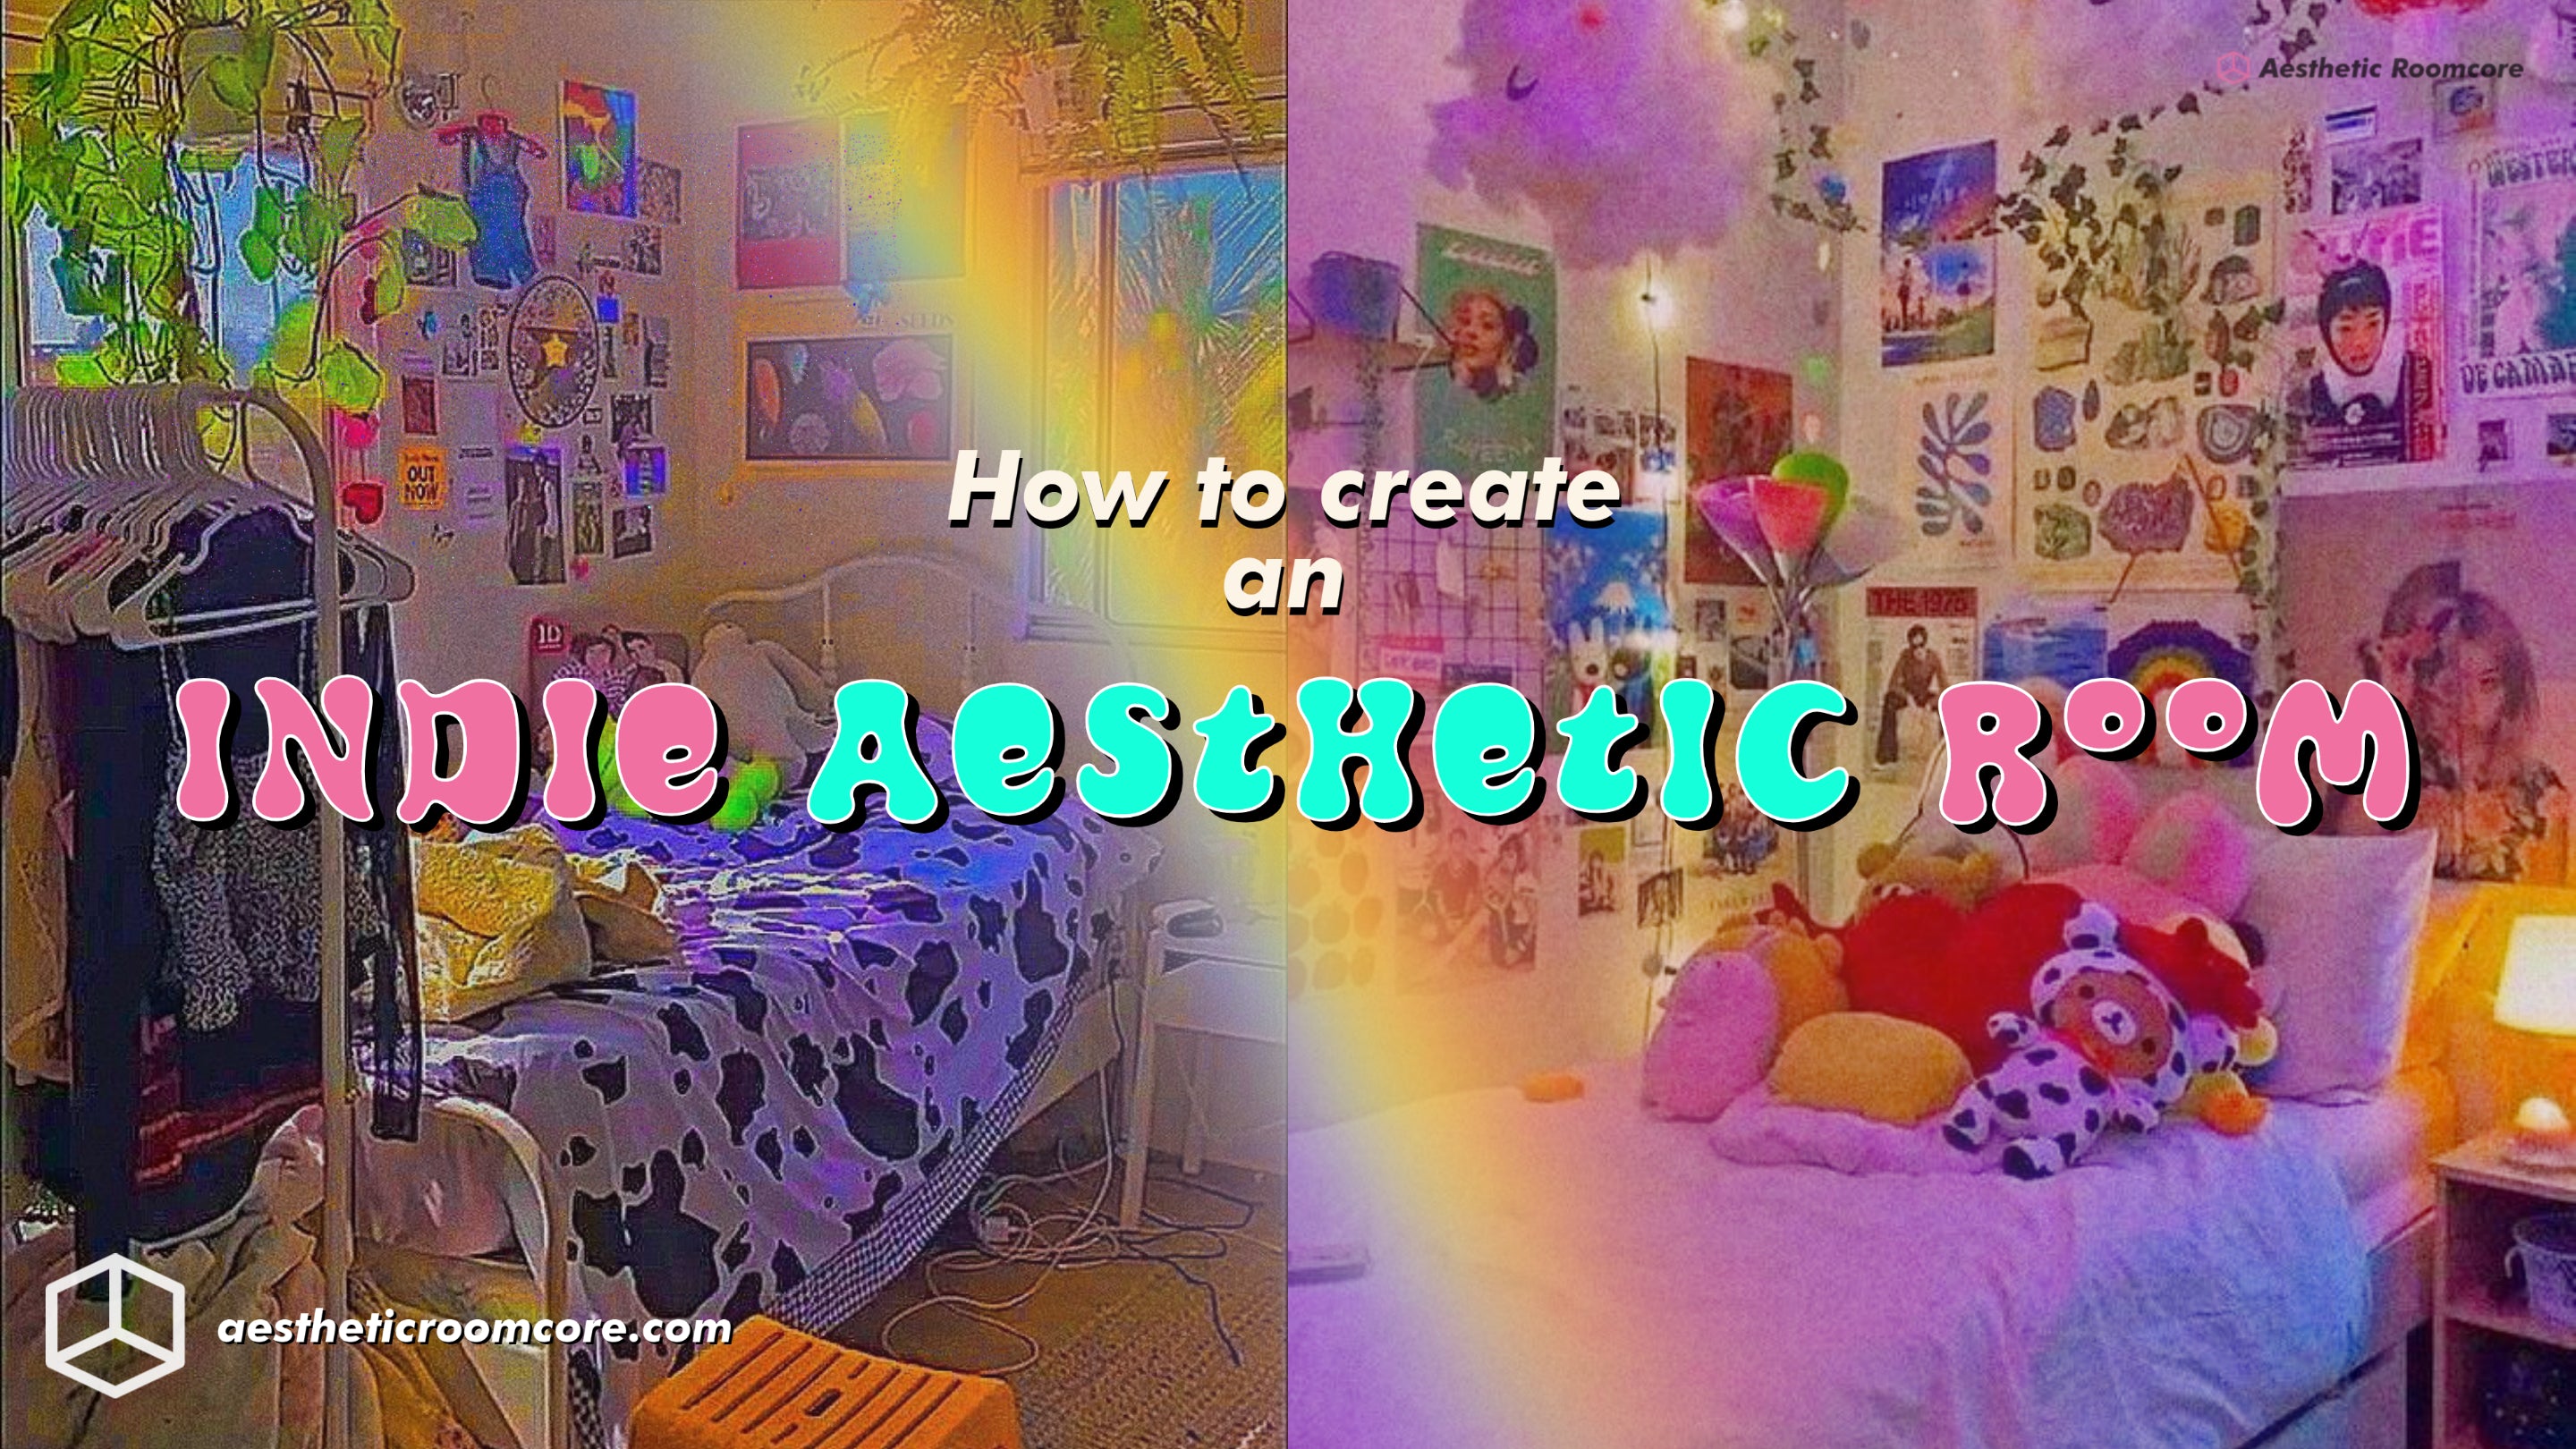 How to Create an Indie Aesthetic Room | Aesthetic Roomcore